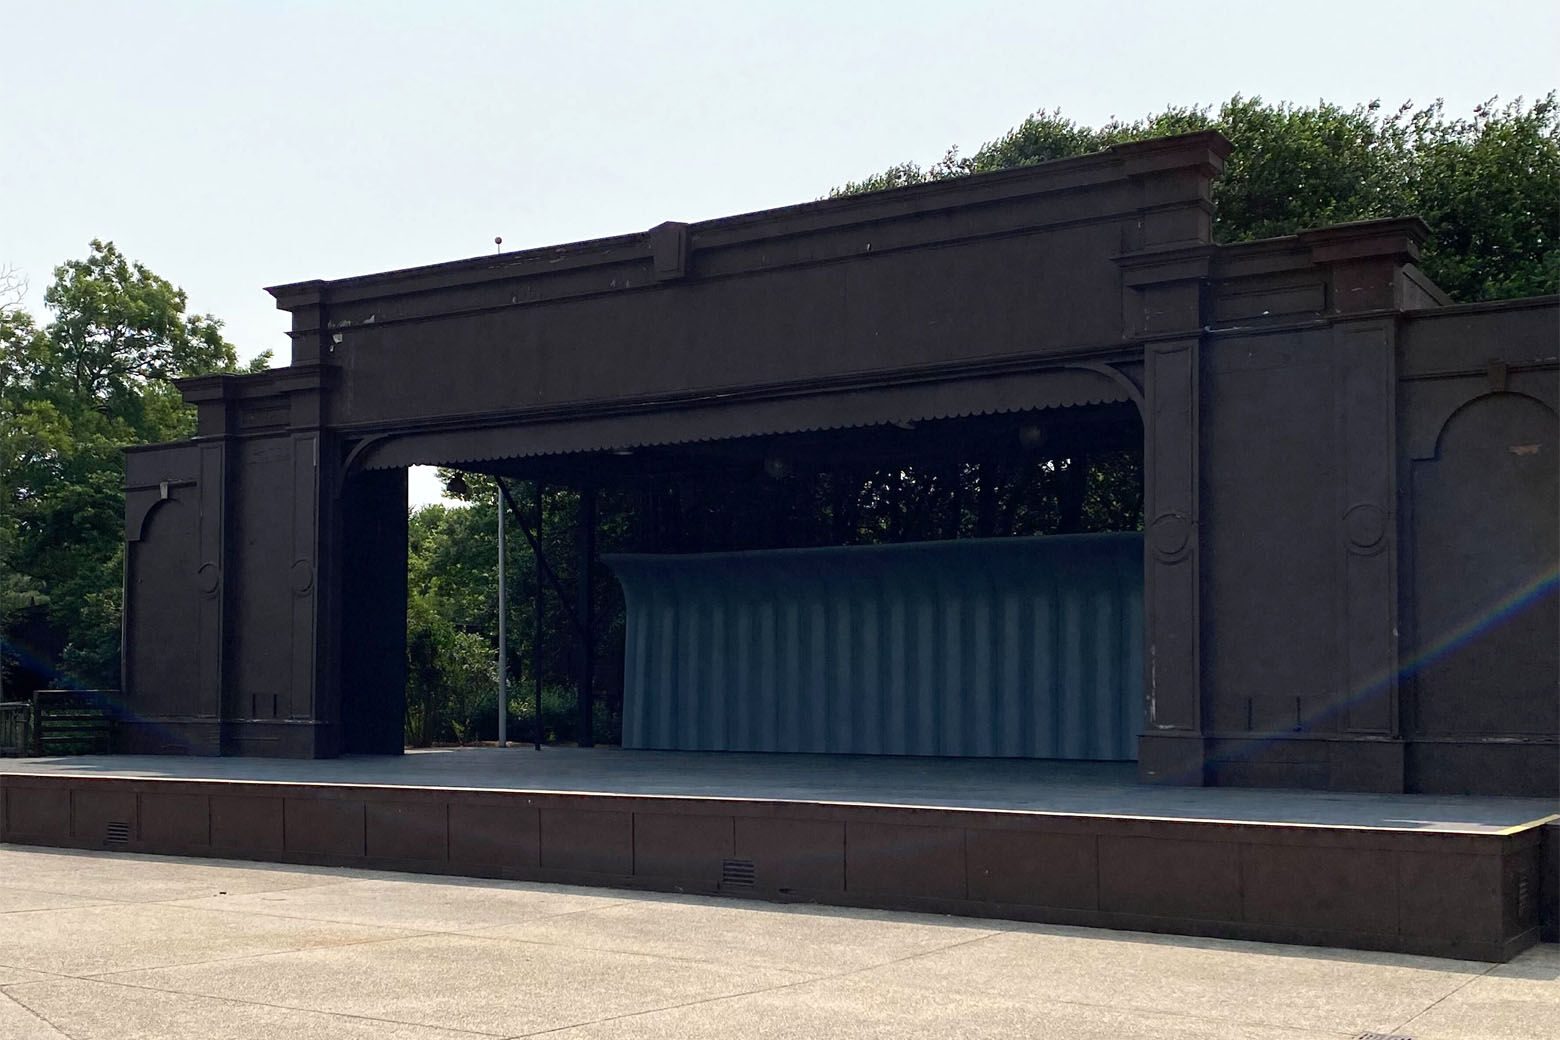 The Sylvan Theater, just south of the Washington Monument, is set to get more seats, bathrooms and concessions ahead of the United States semiquincentennial celebration on July 4, 2026. (John Domen/WTOP)